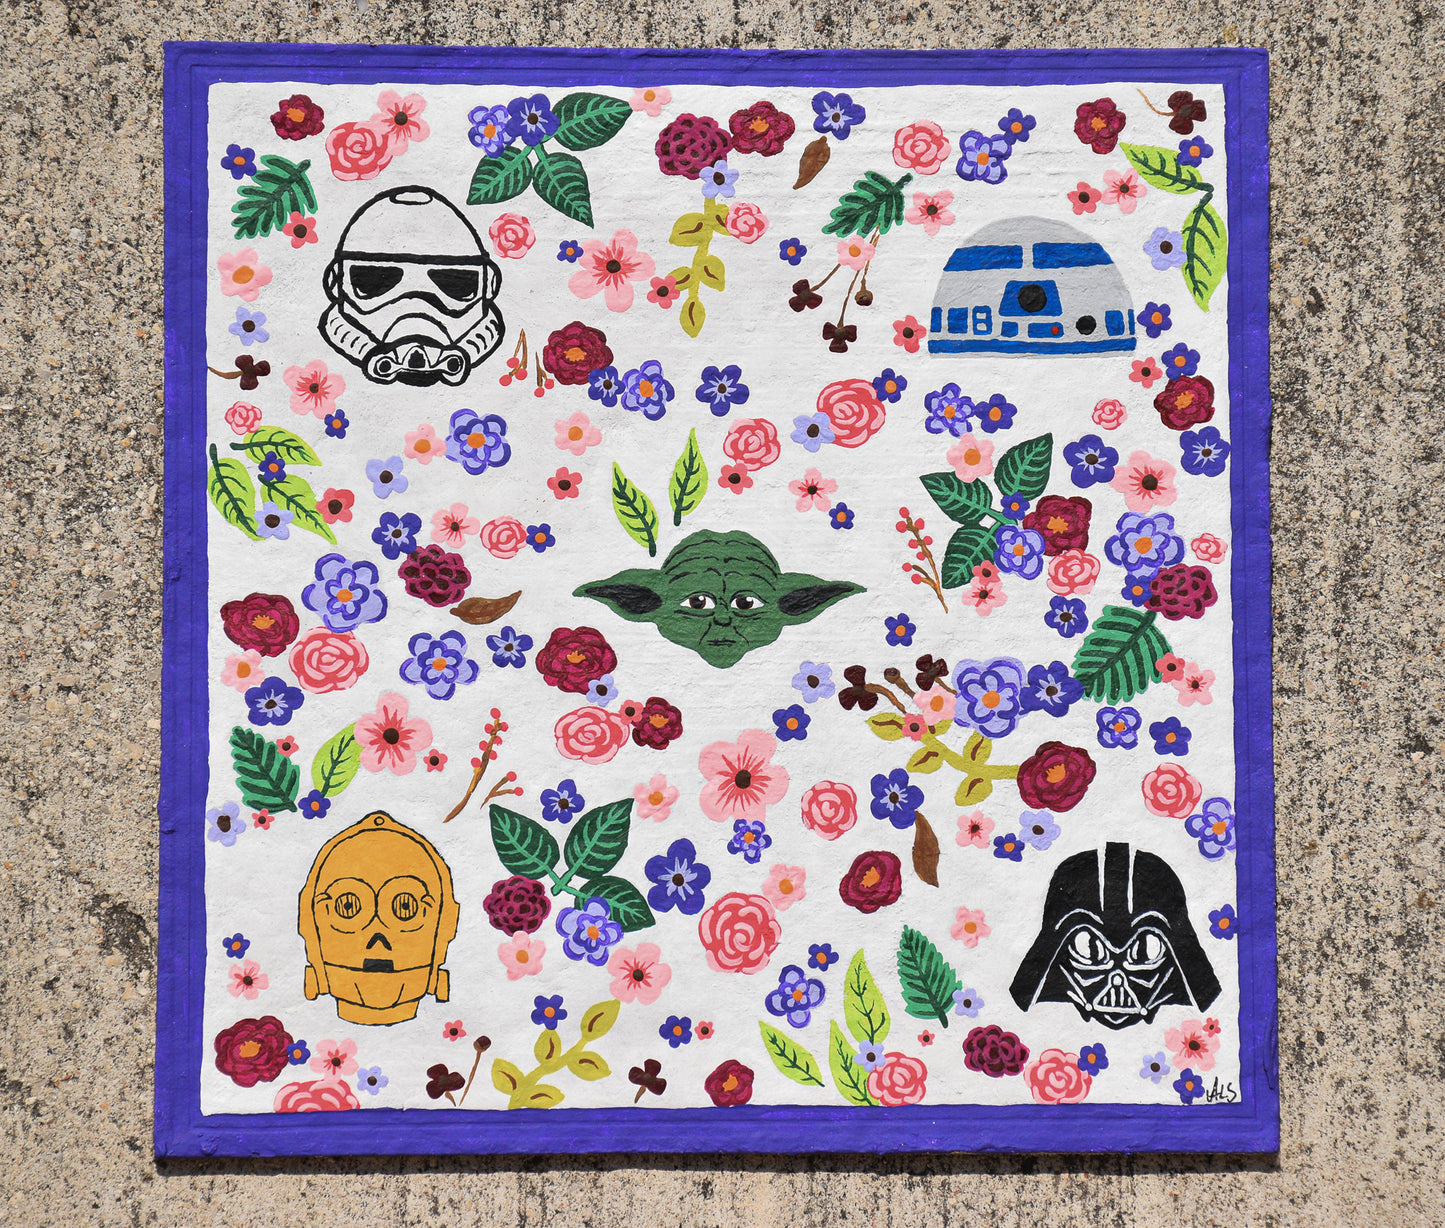 Floral Star Wars Characters